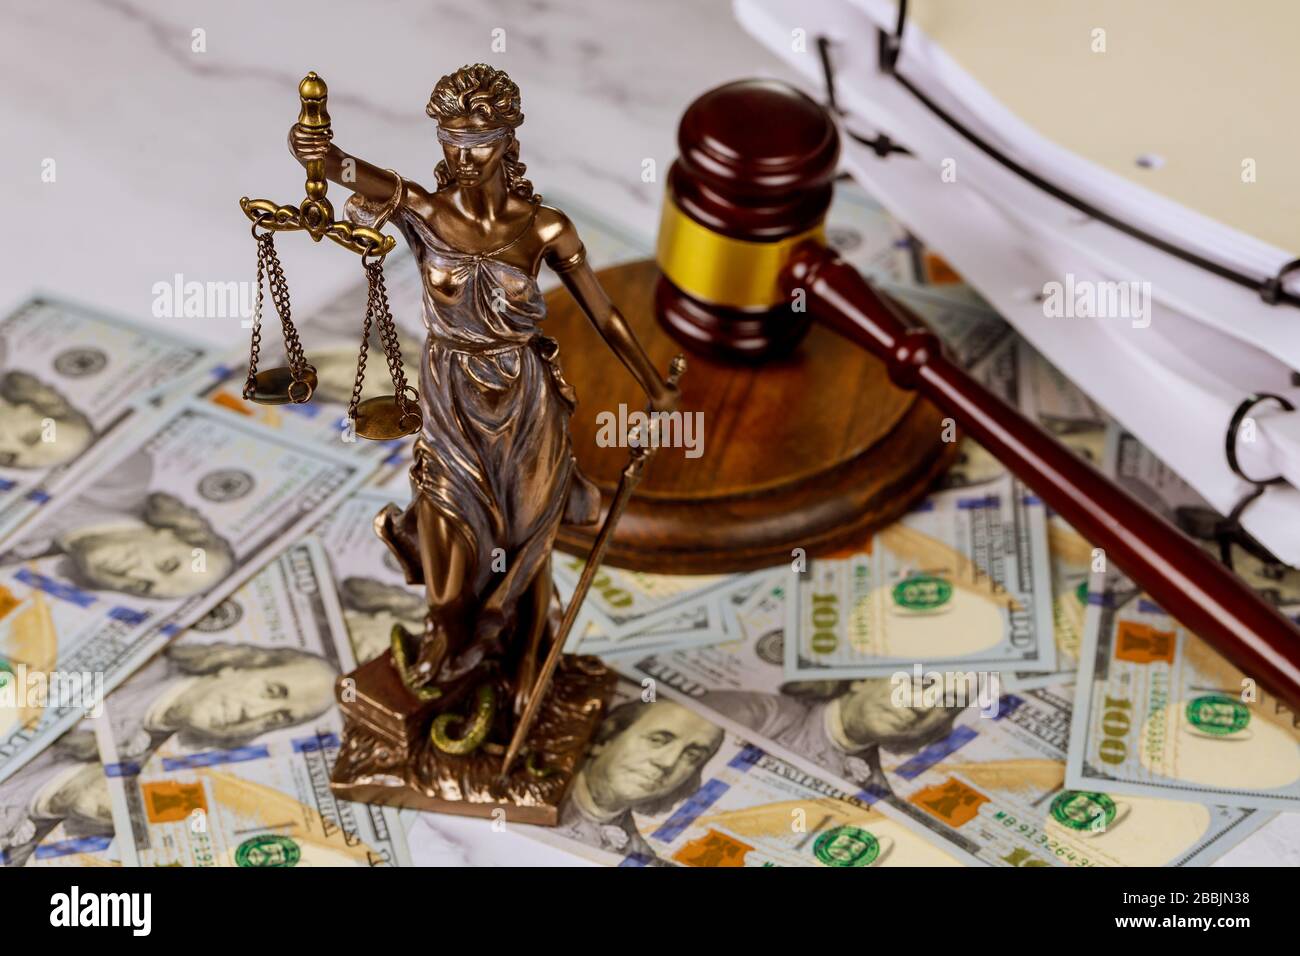 Judge gavel, lawyer office law and justice with a dollar sign corruption venality concepts Stock Photo